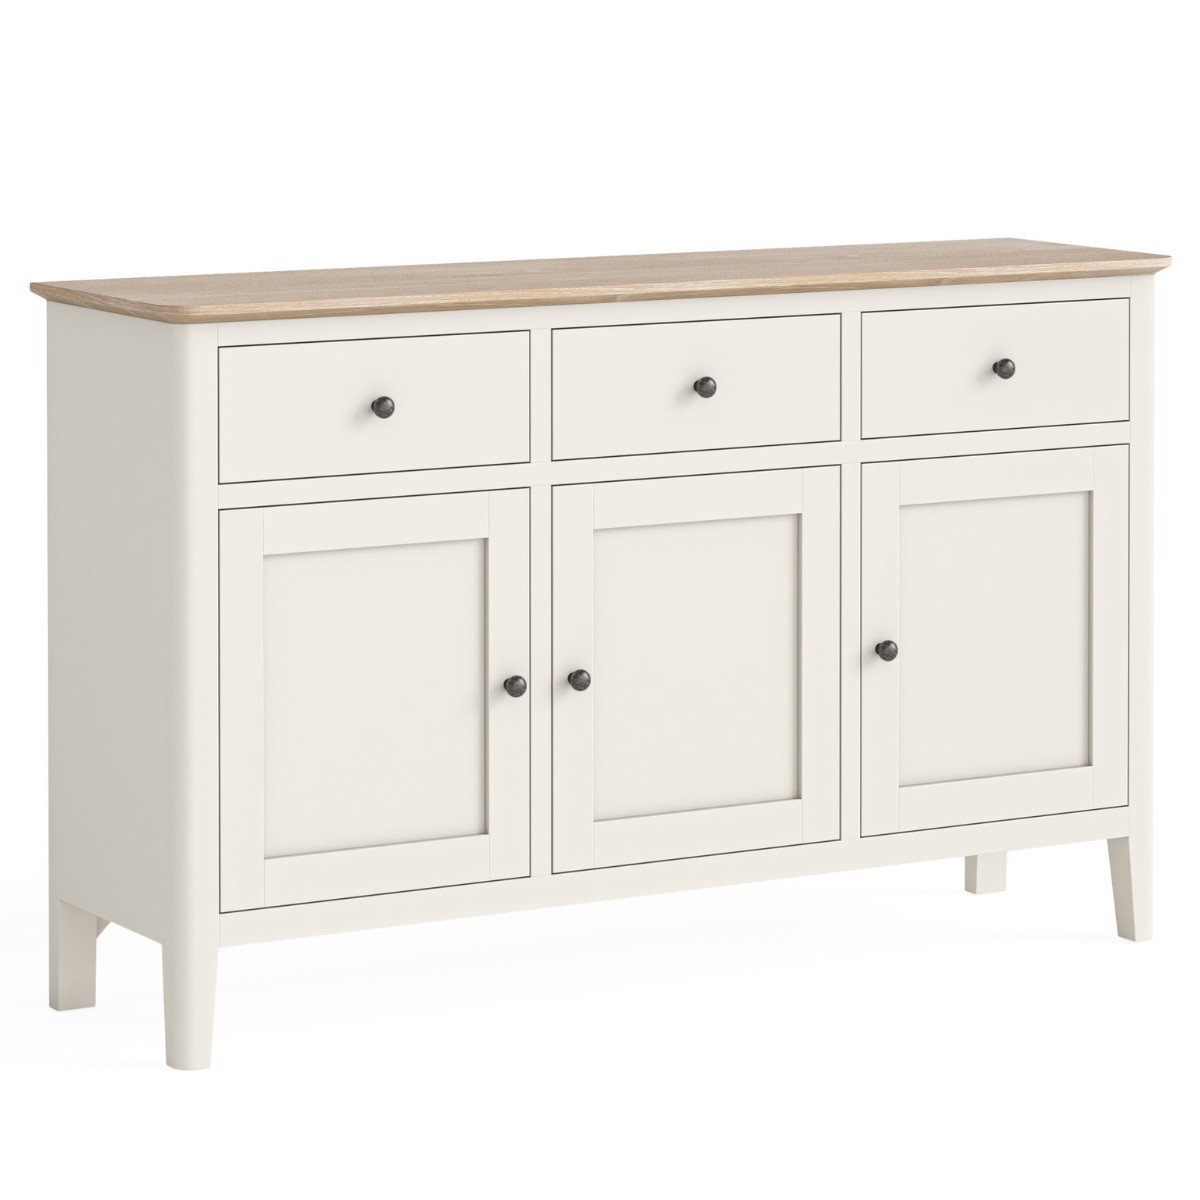 Marcella White Large Sideboard - 1